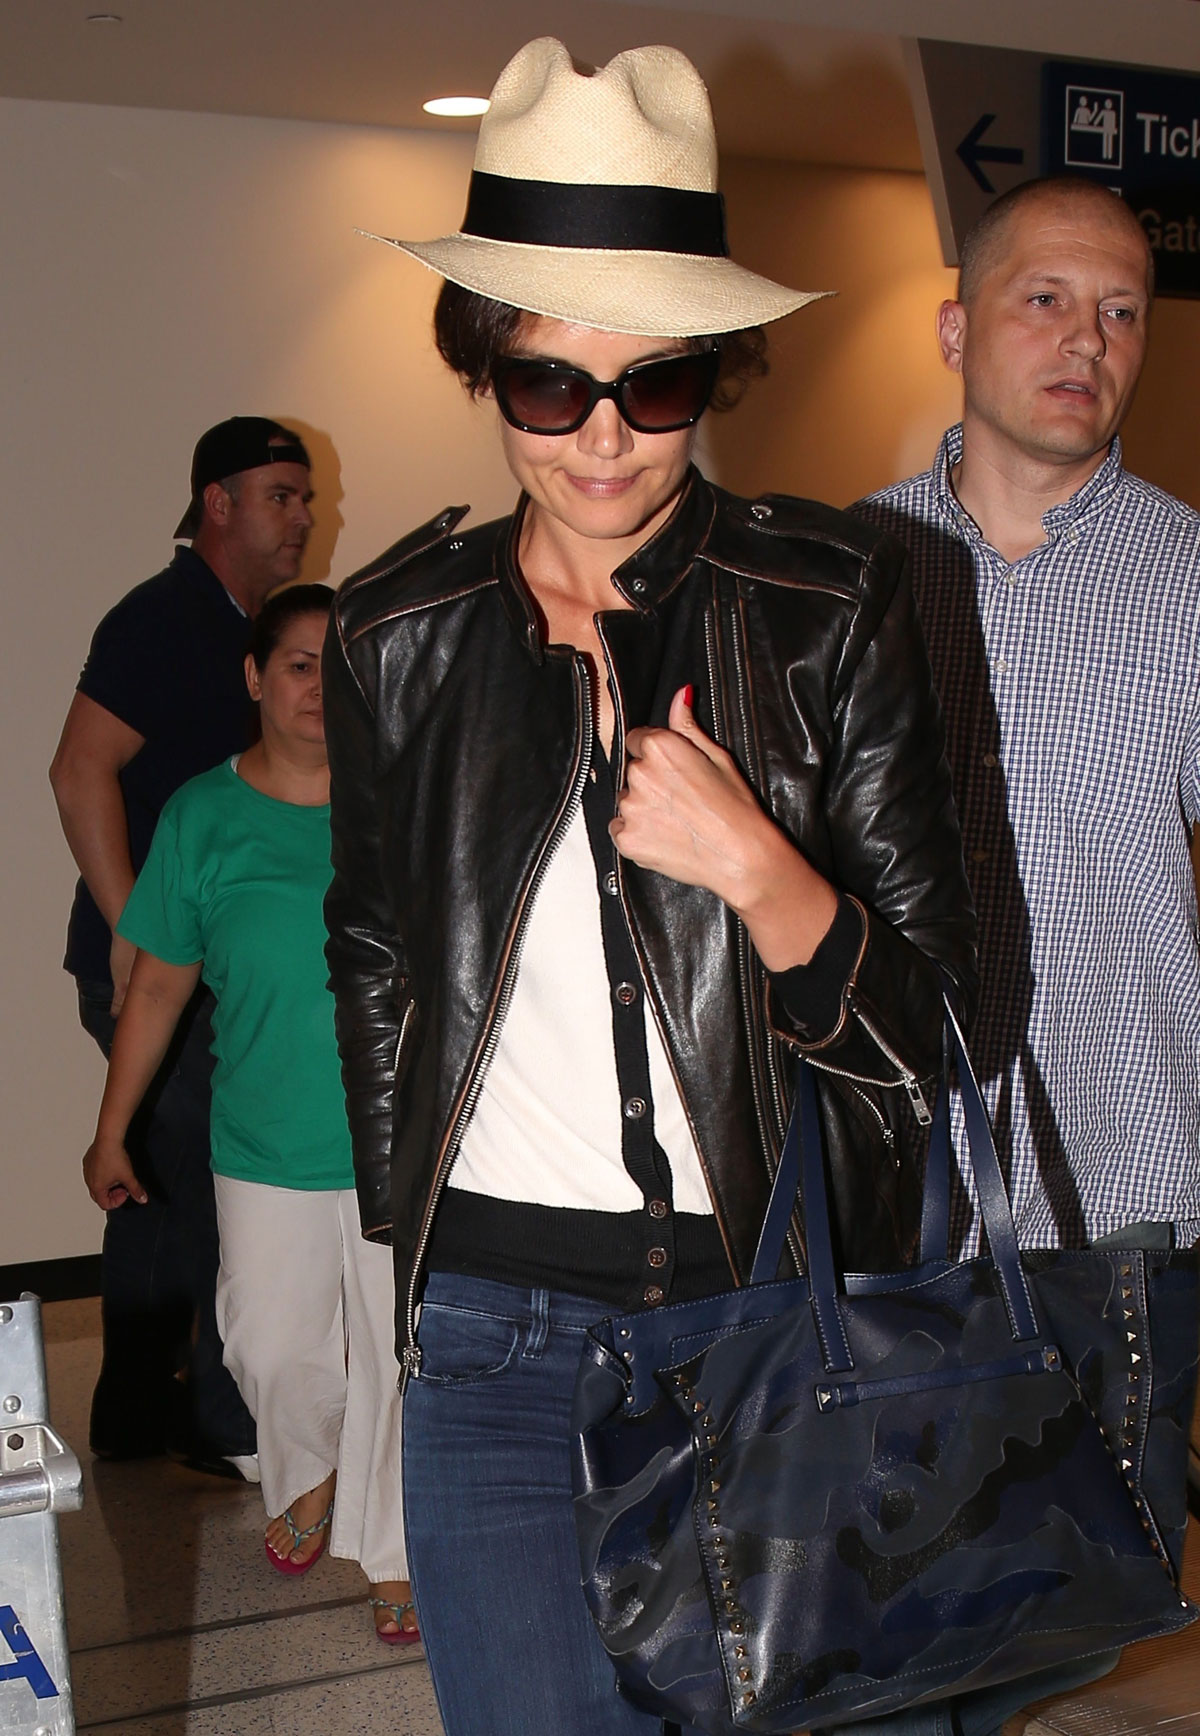 Katie Holmes arriving at LAX airport